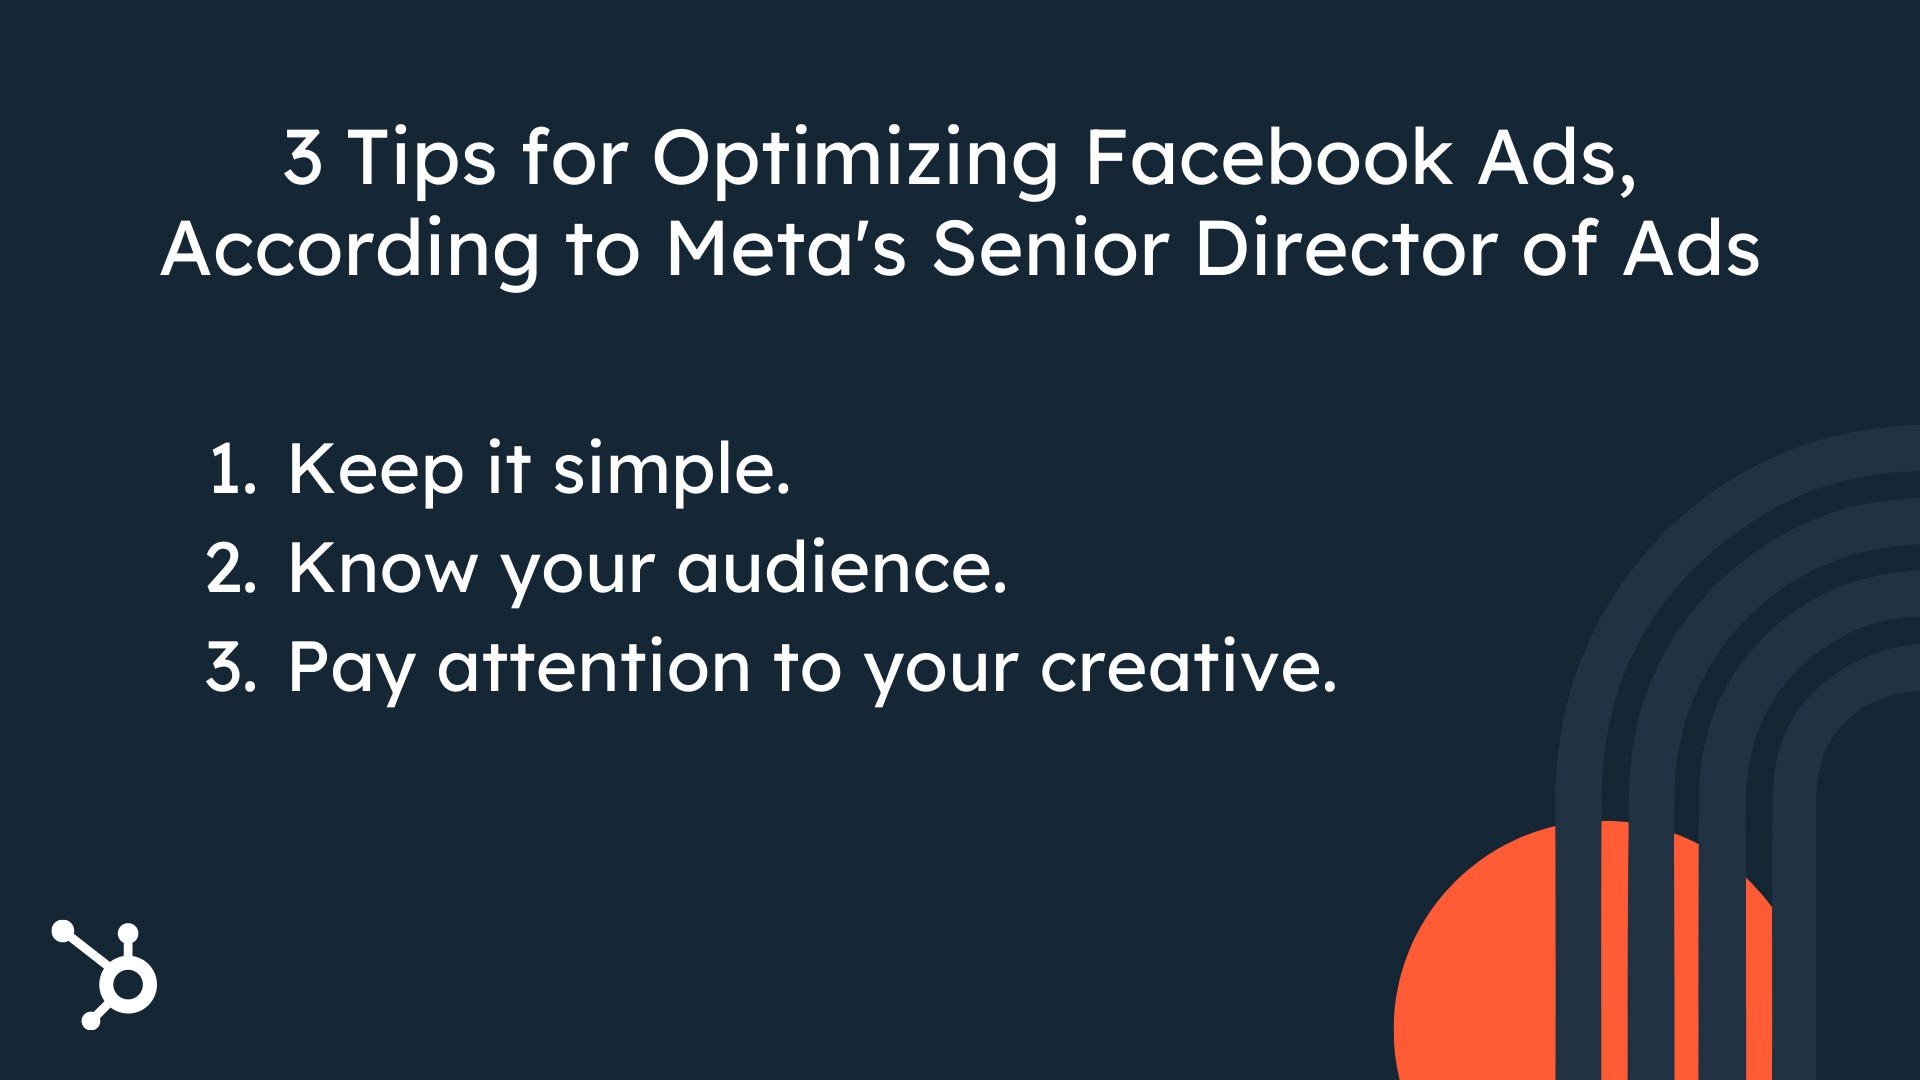 optimize facebook ads tips from meta